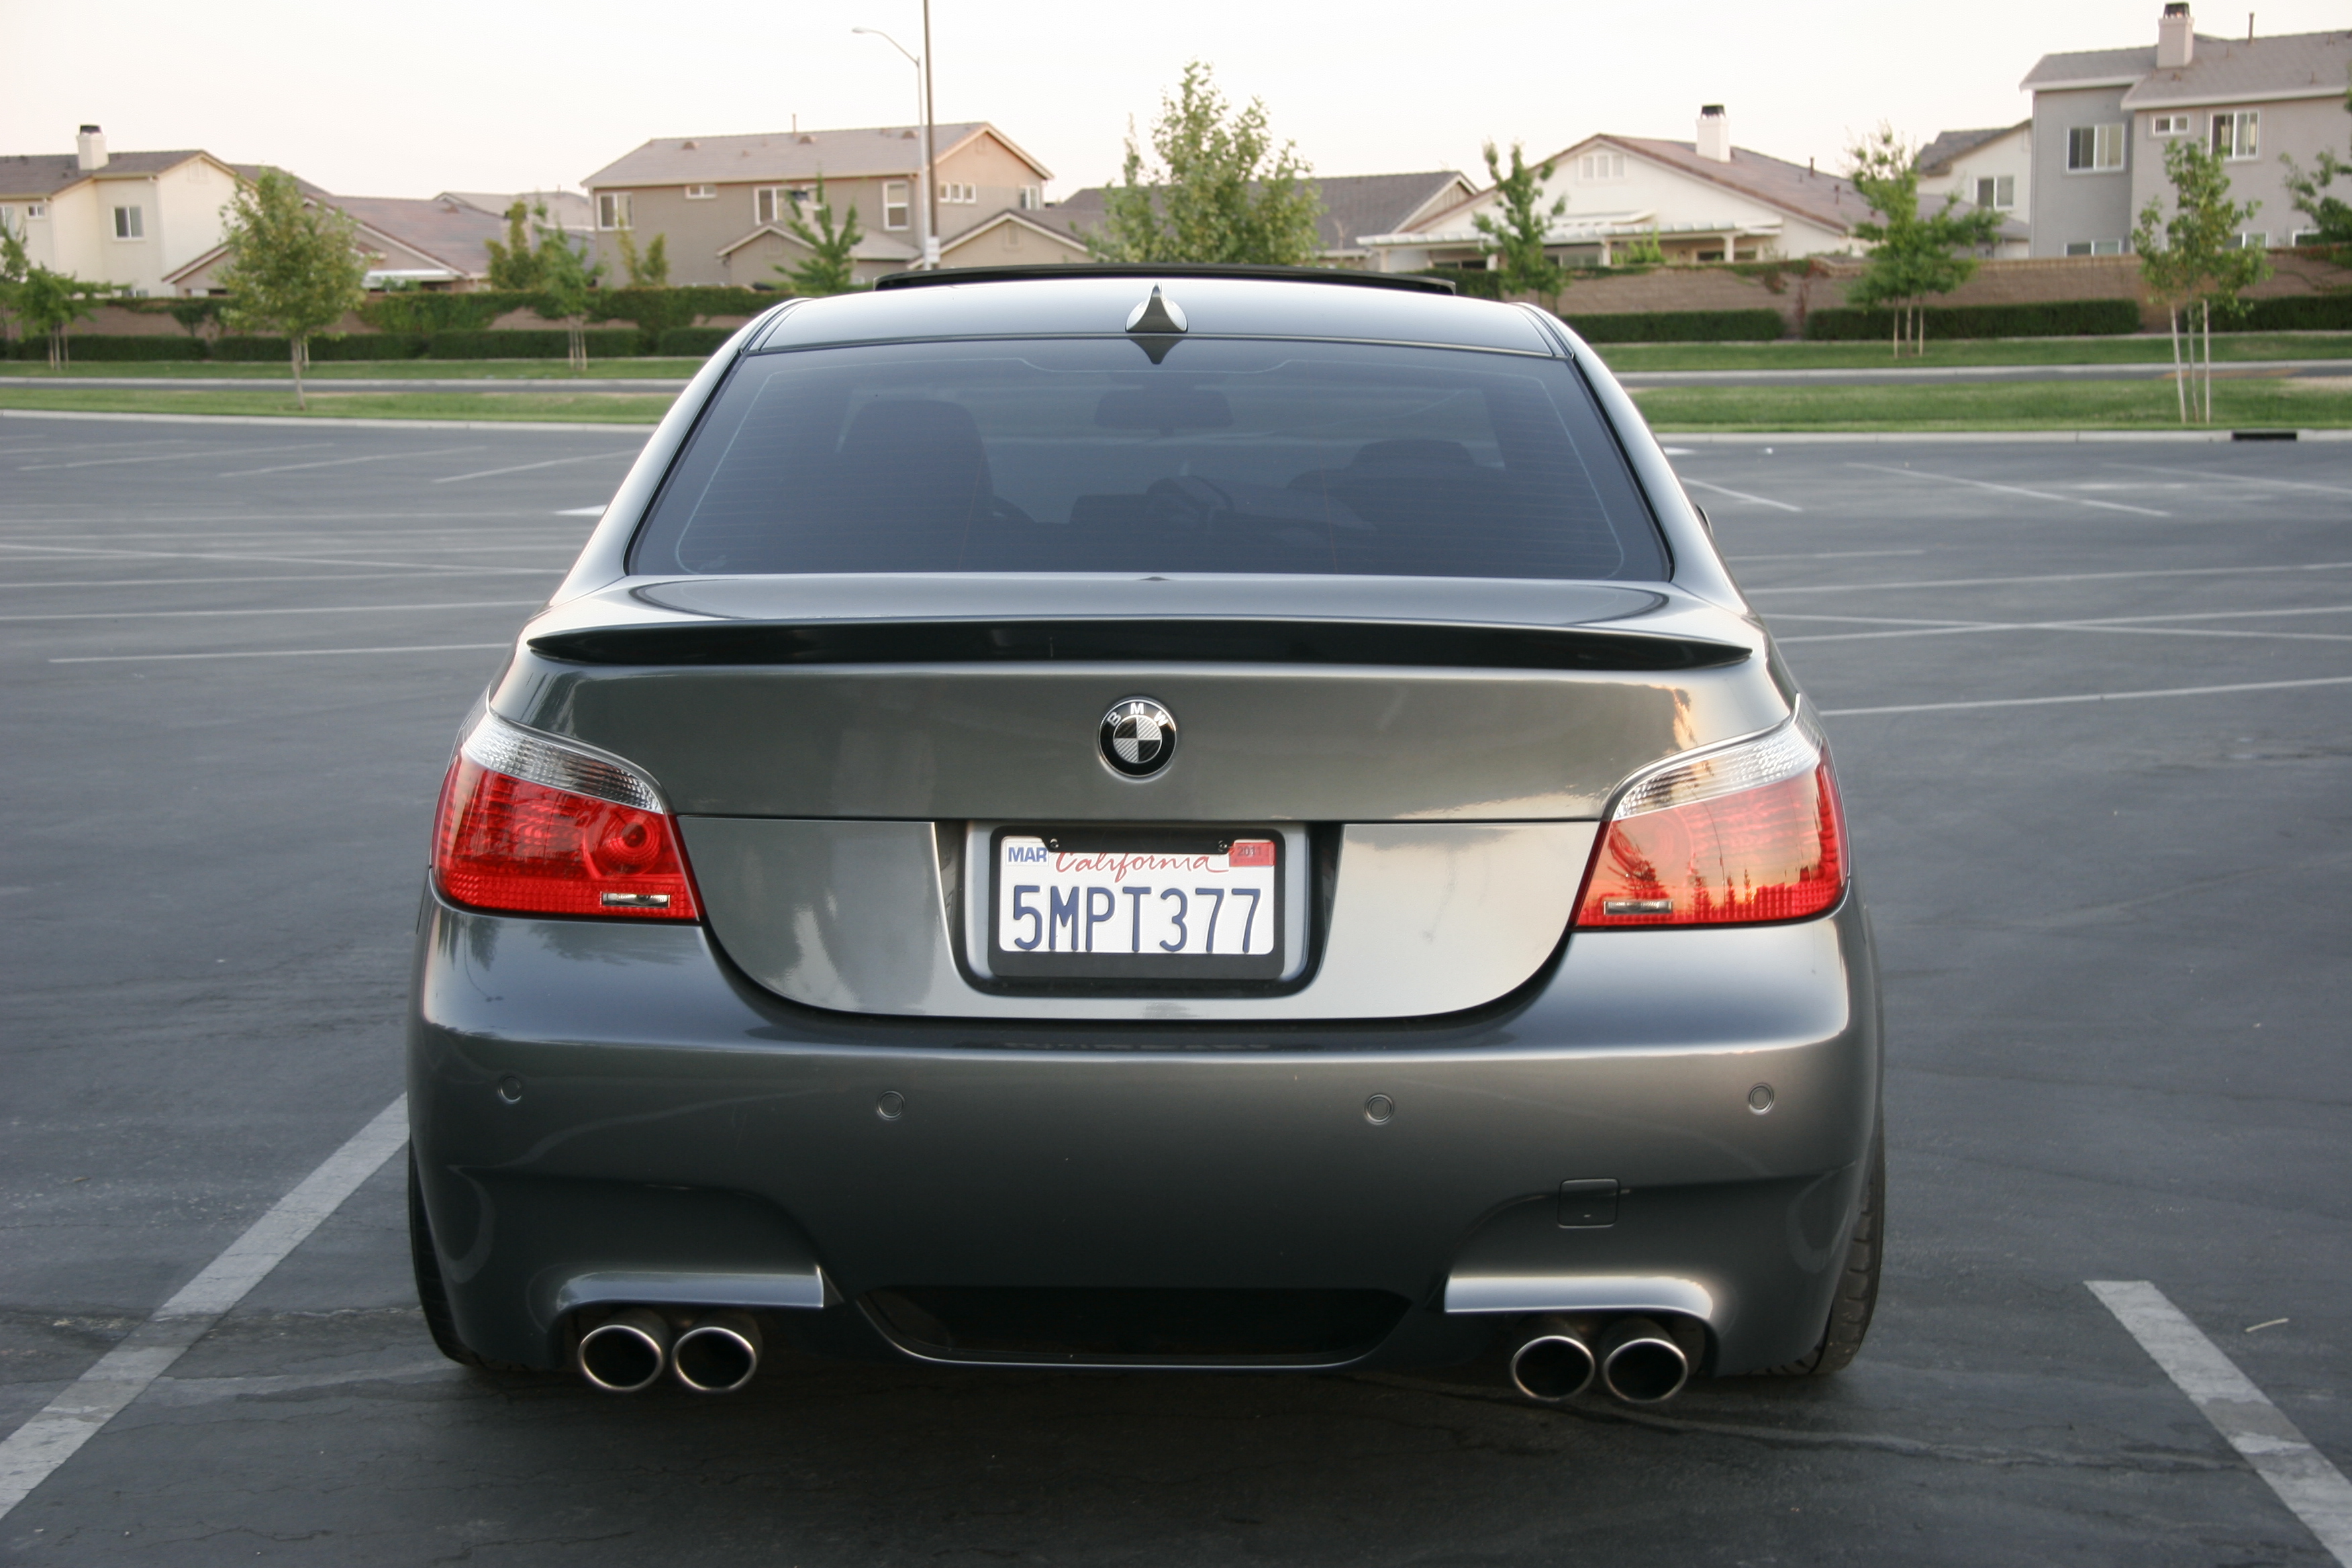 2005 BMW 545i Sport Package Certified Pre Owned - 5Series.net - Forums